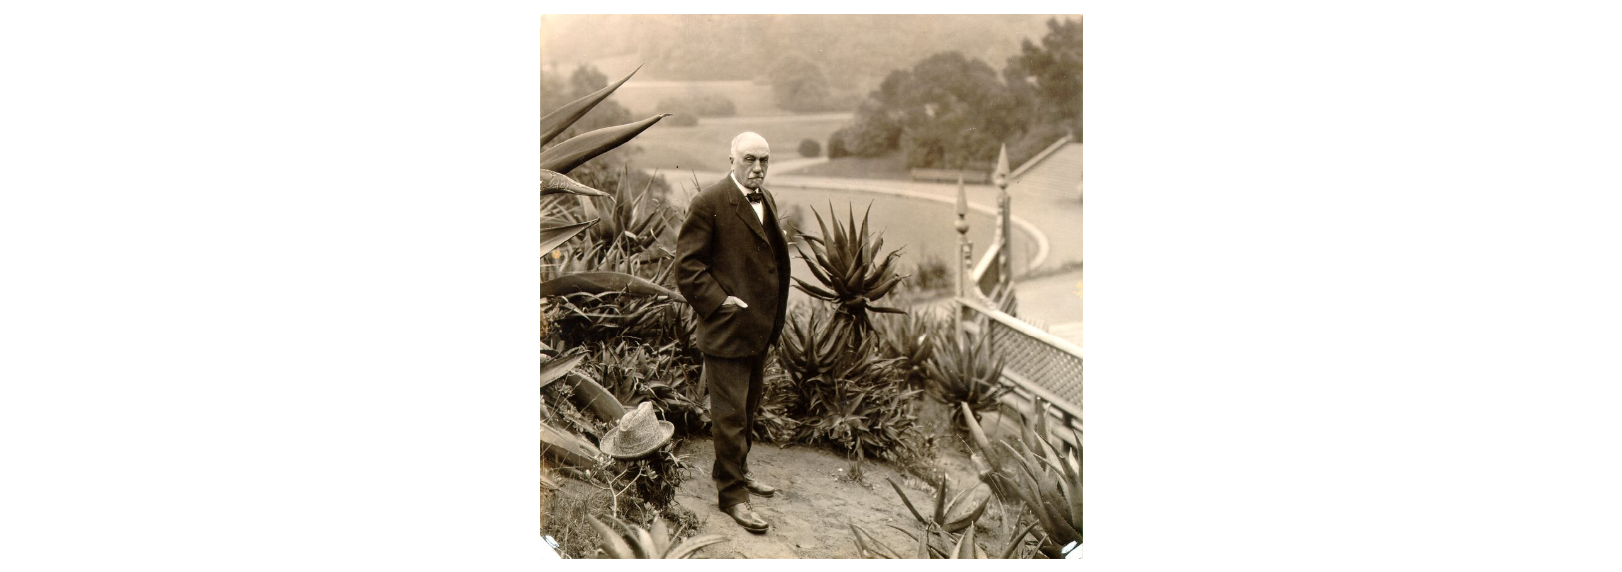 Sepia toned photo of a tall man in a black suit with large eyebrows. He stands surrounded by palm trees with more greenery behind him.